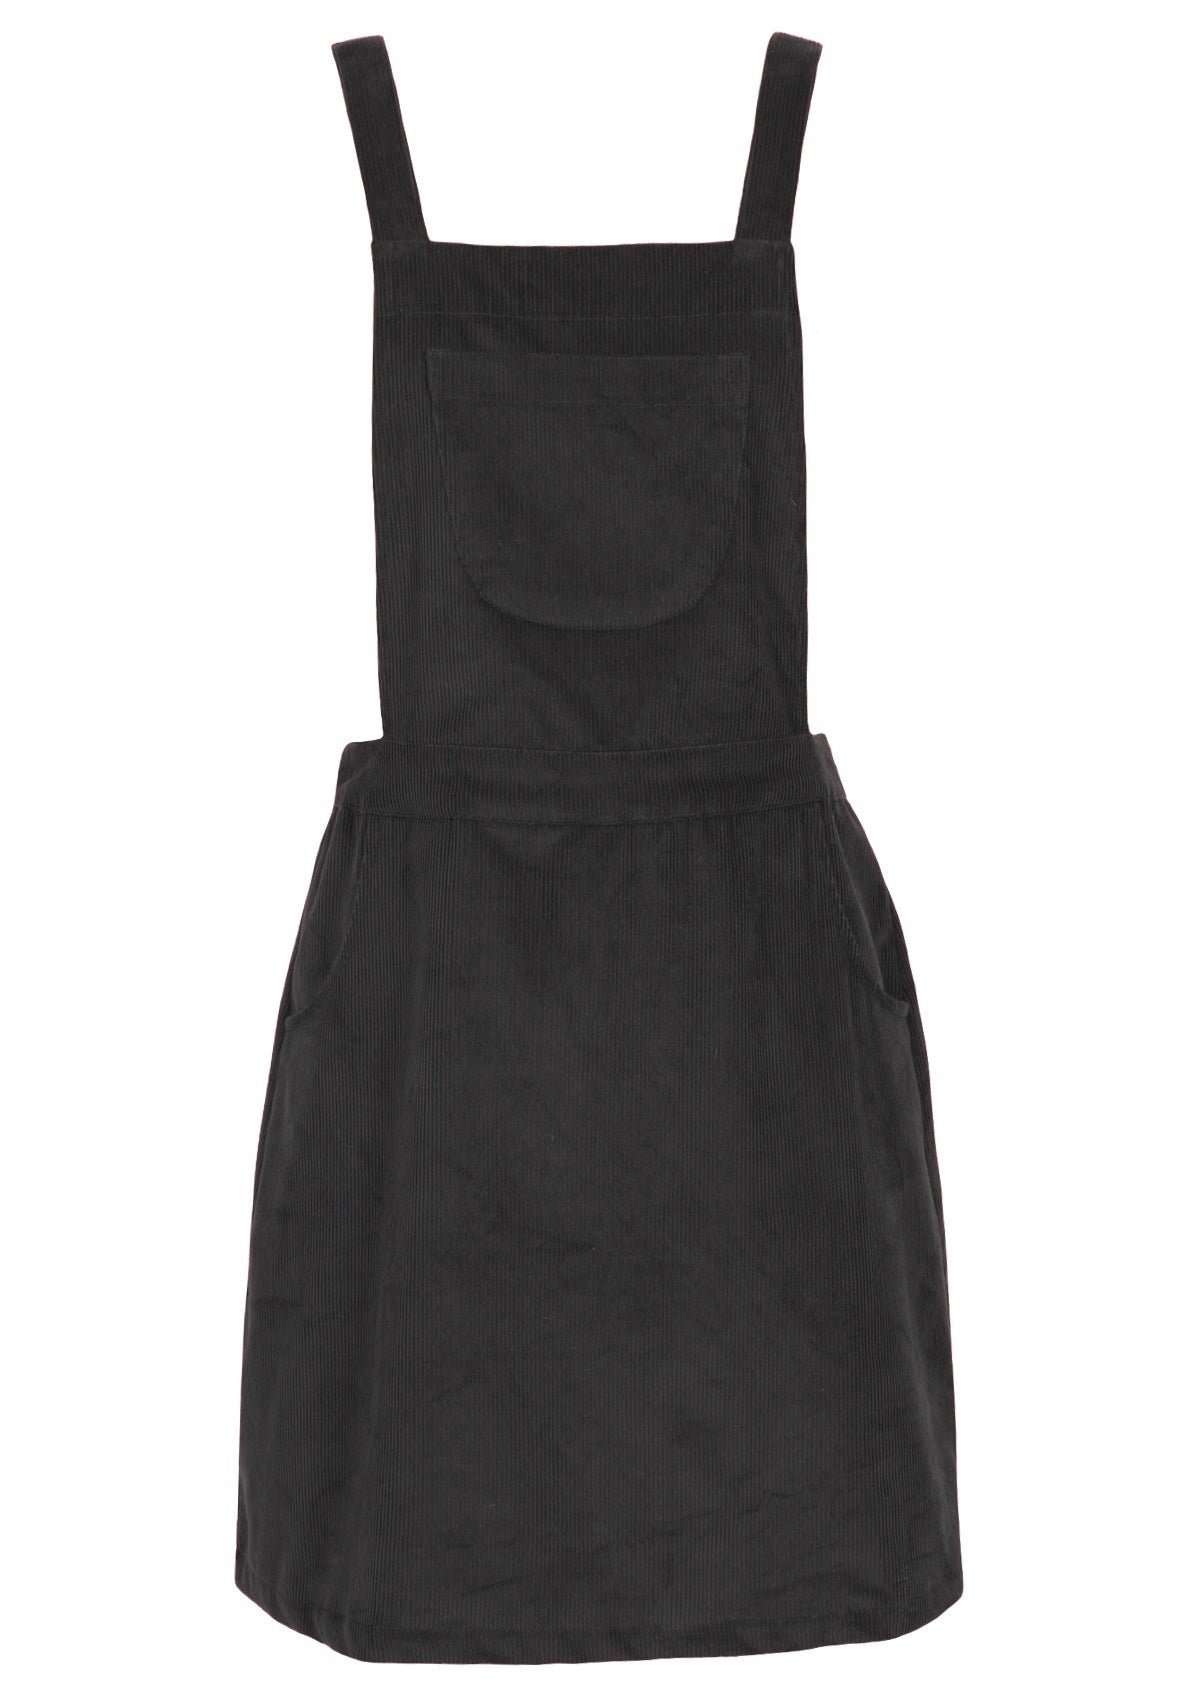 Grey pinafore is 100% cotton, with a pocket in the bib. 